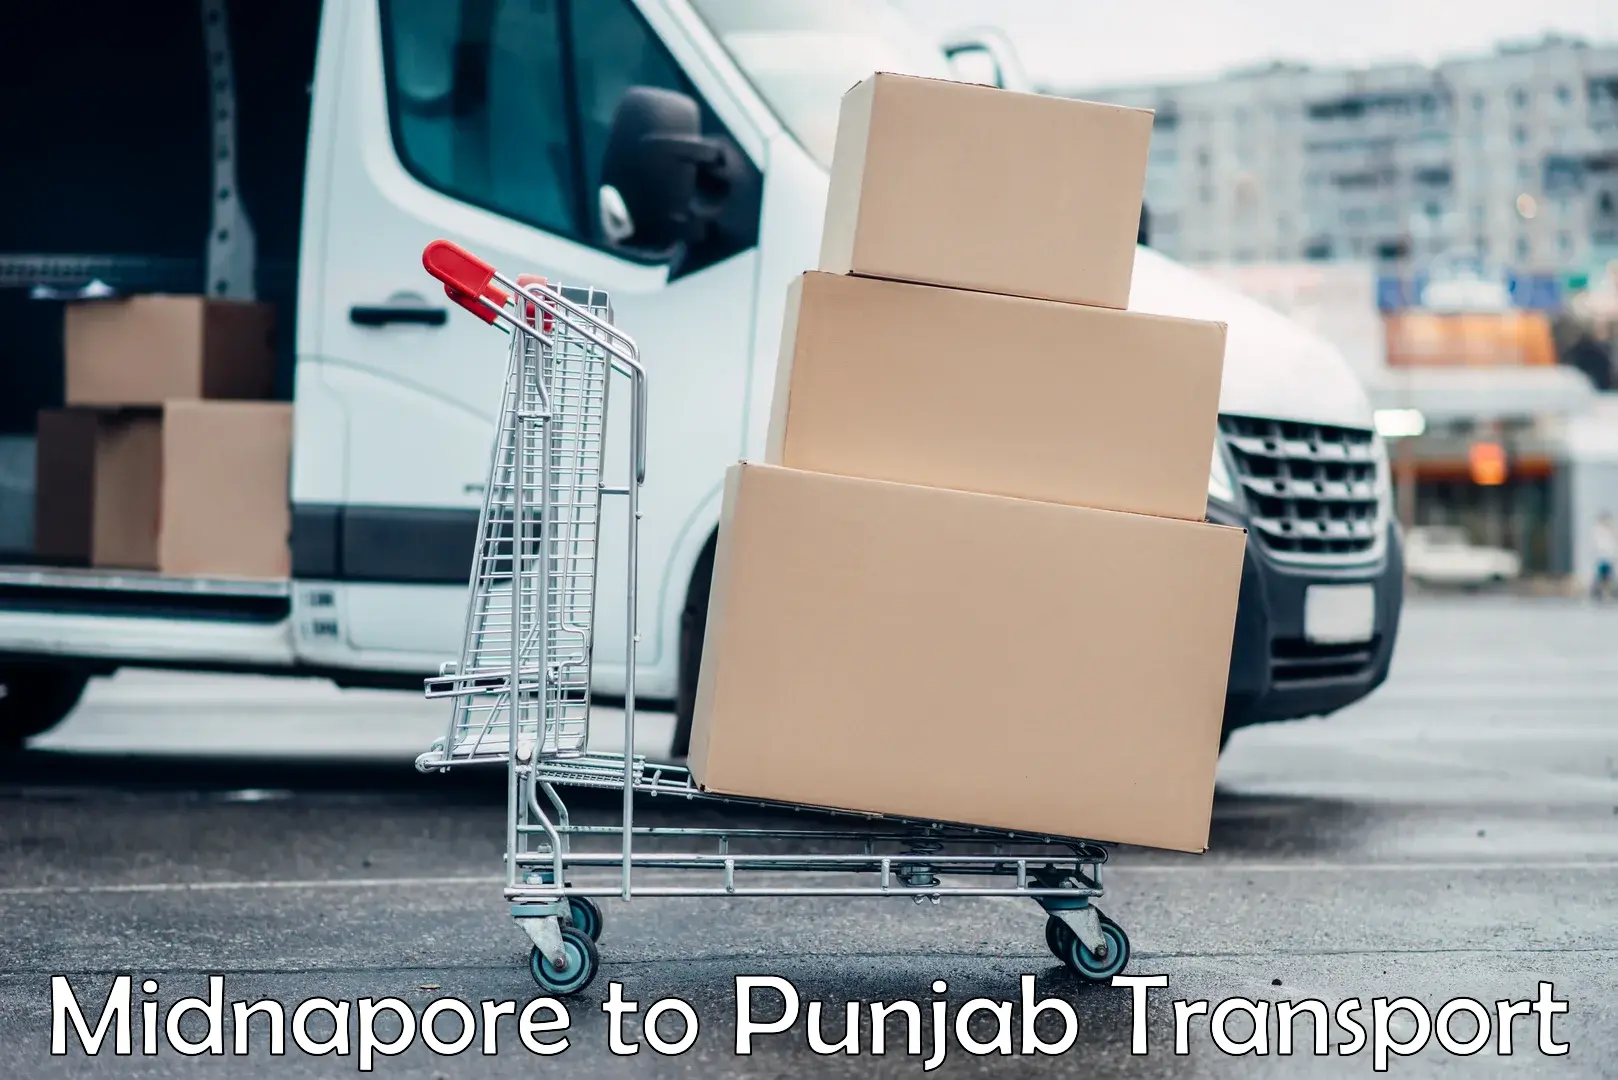 Pick up transport service in Midnapore to Punjab